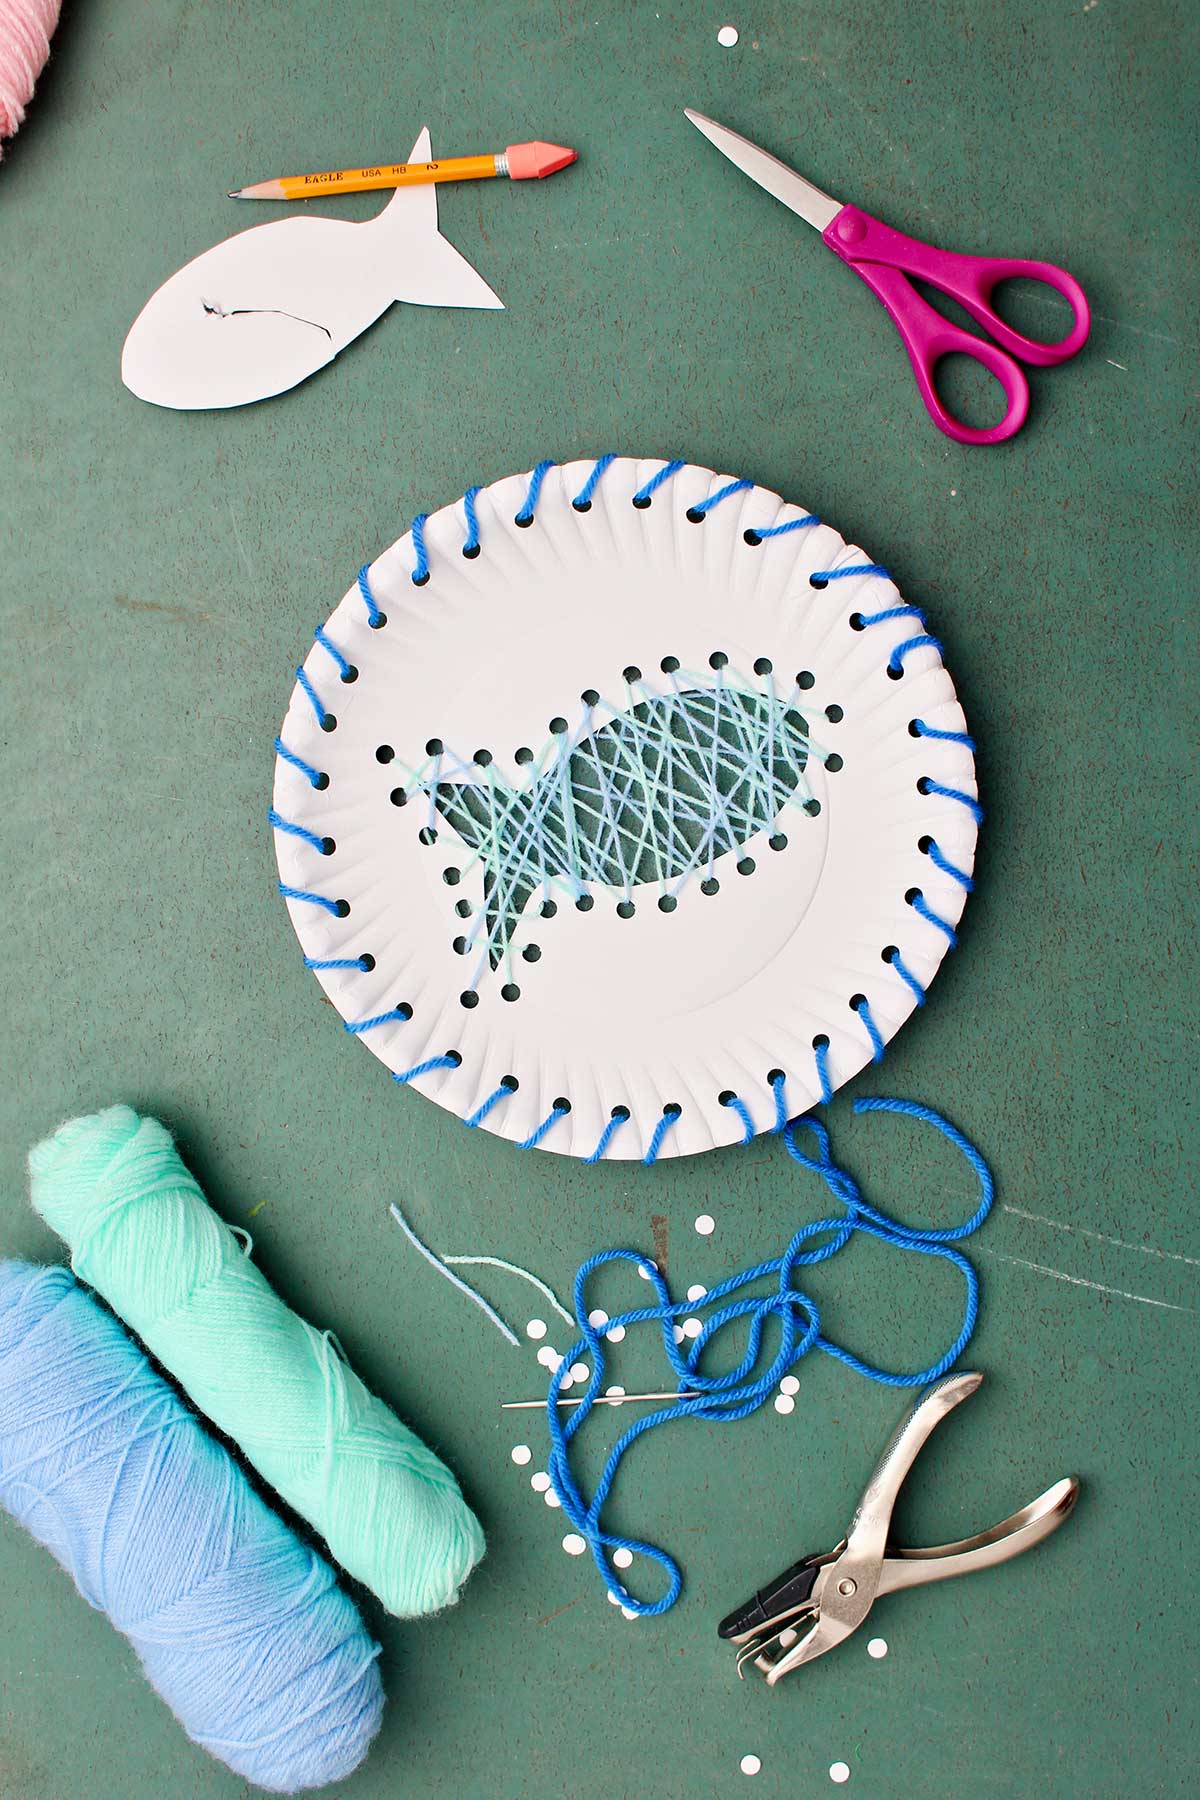 Fish design Paper Plate Sting Art made with blue yarn with supplies near by.